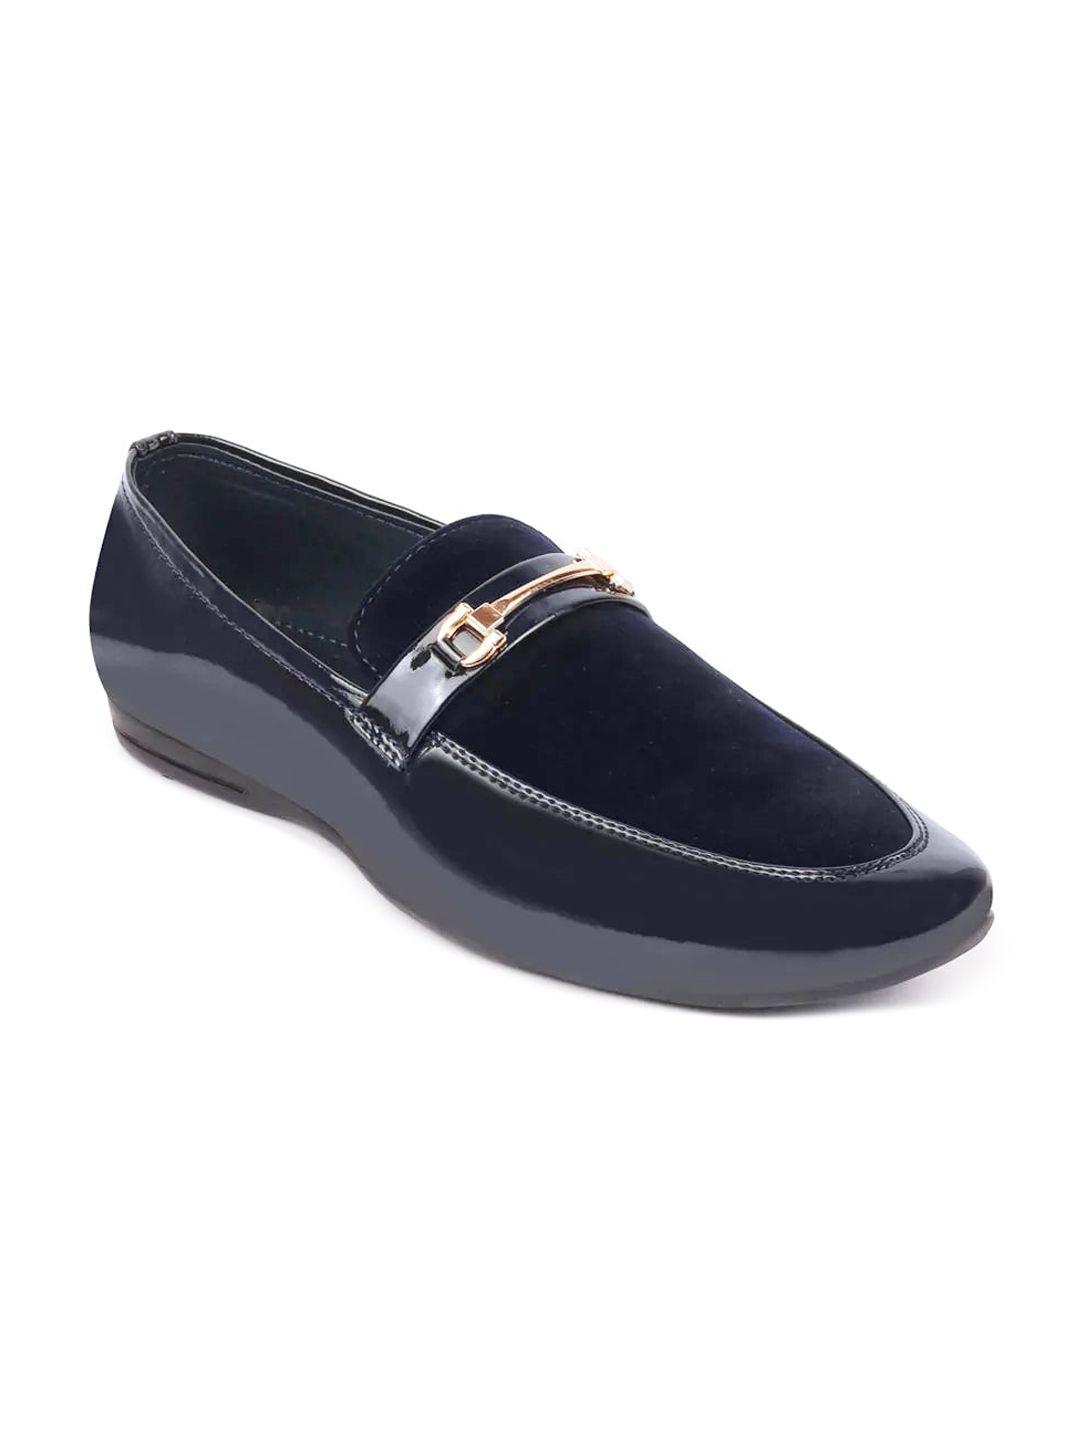 fausto formal buckle loafer shoes